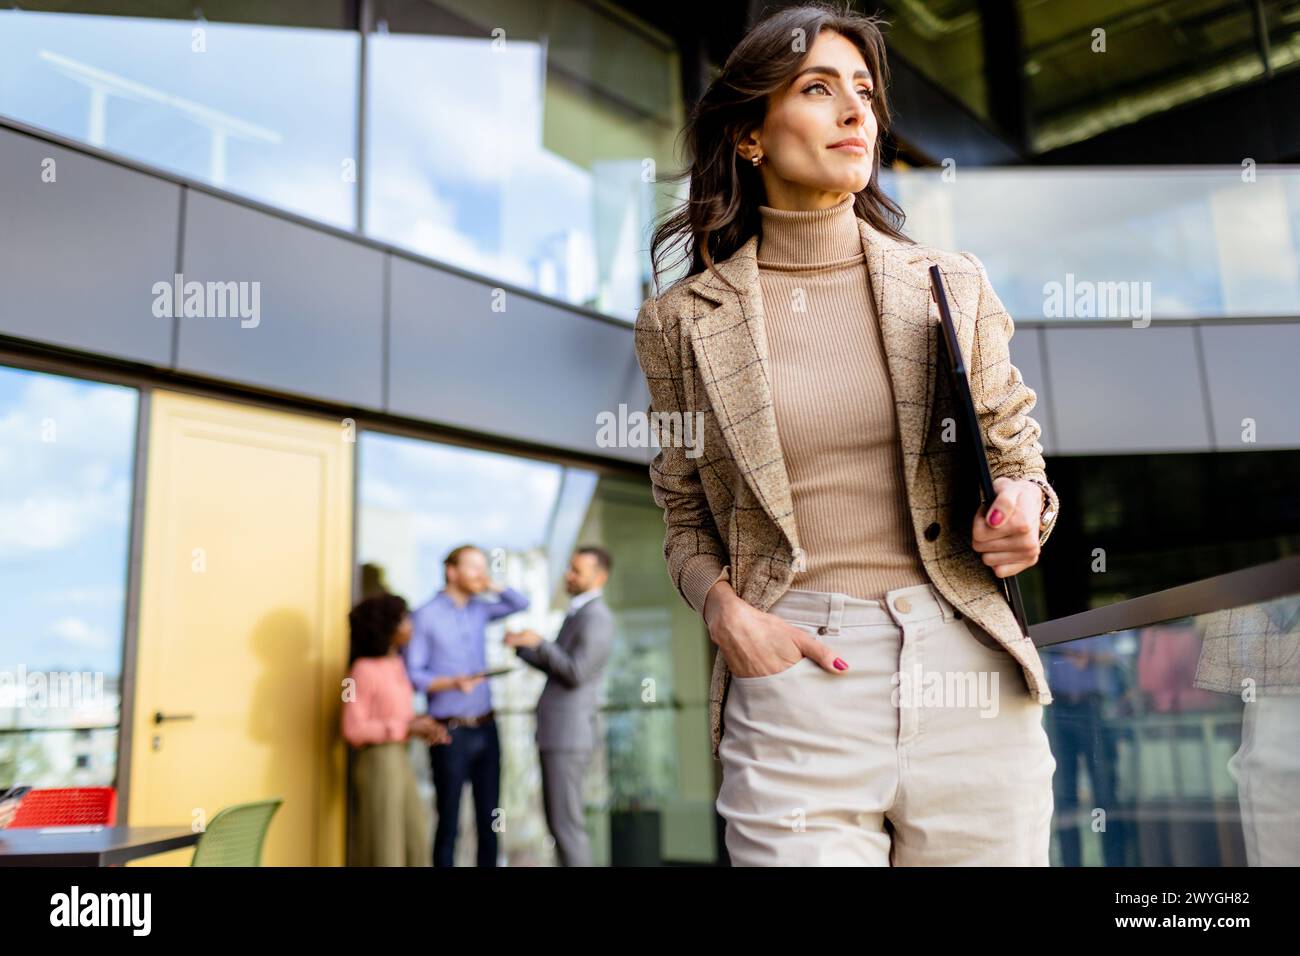 Stylish professional strides forward, glancing to the side, as colleagues converse in the background Stock Photo